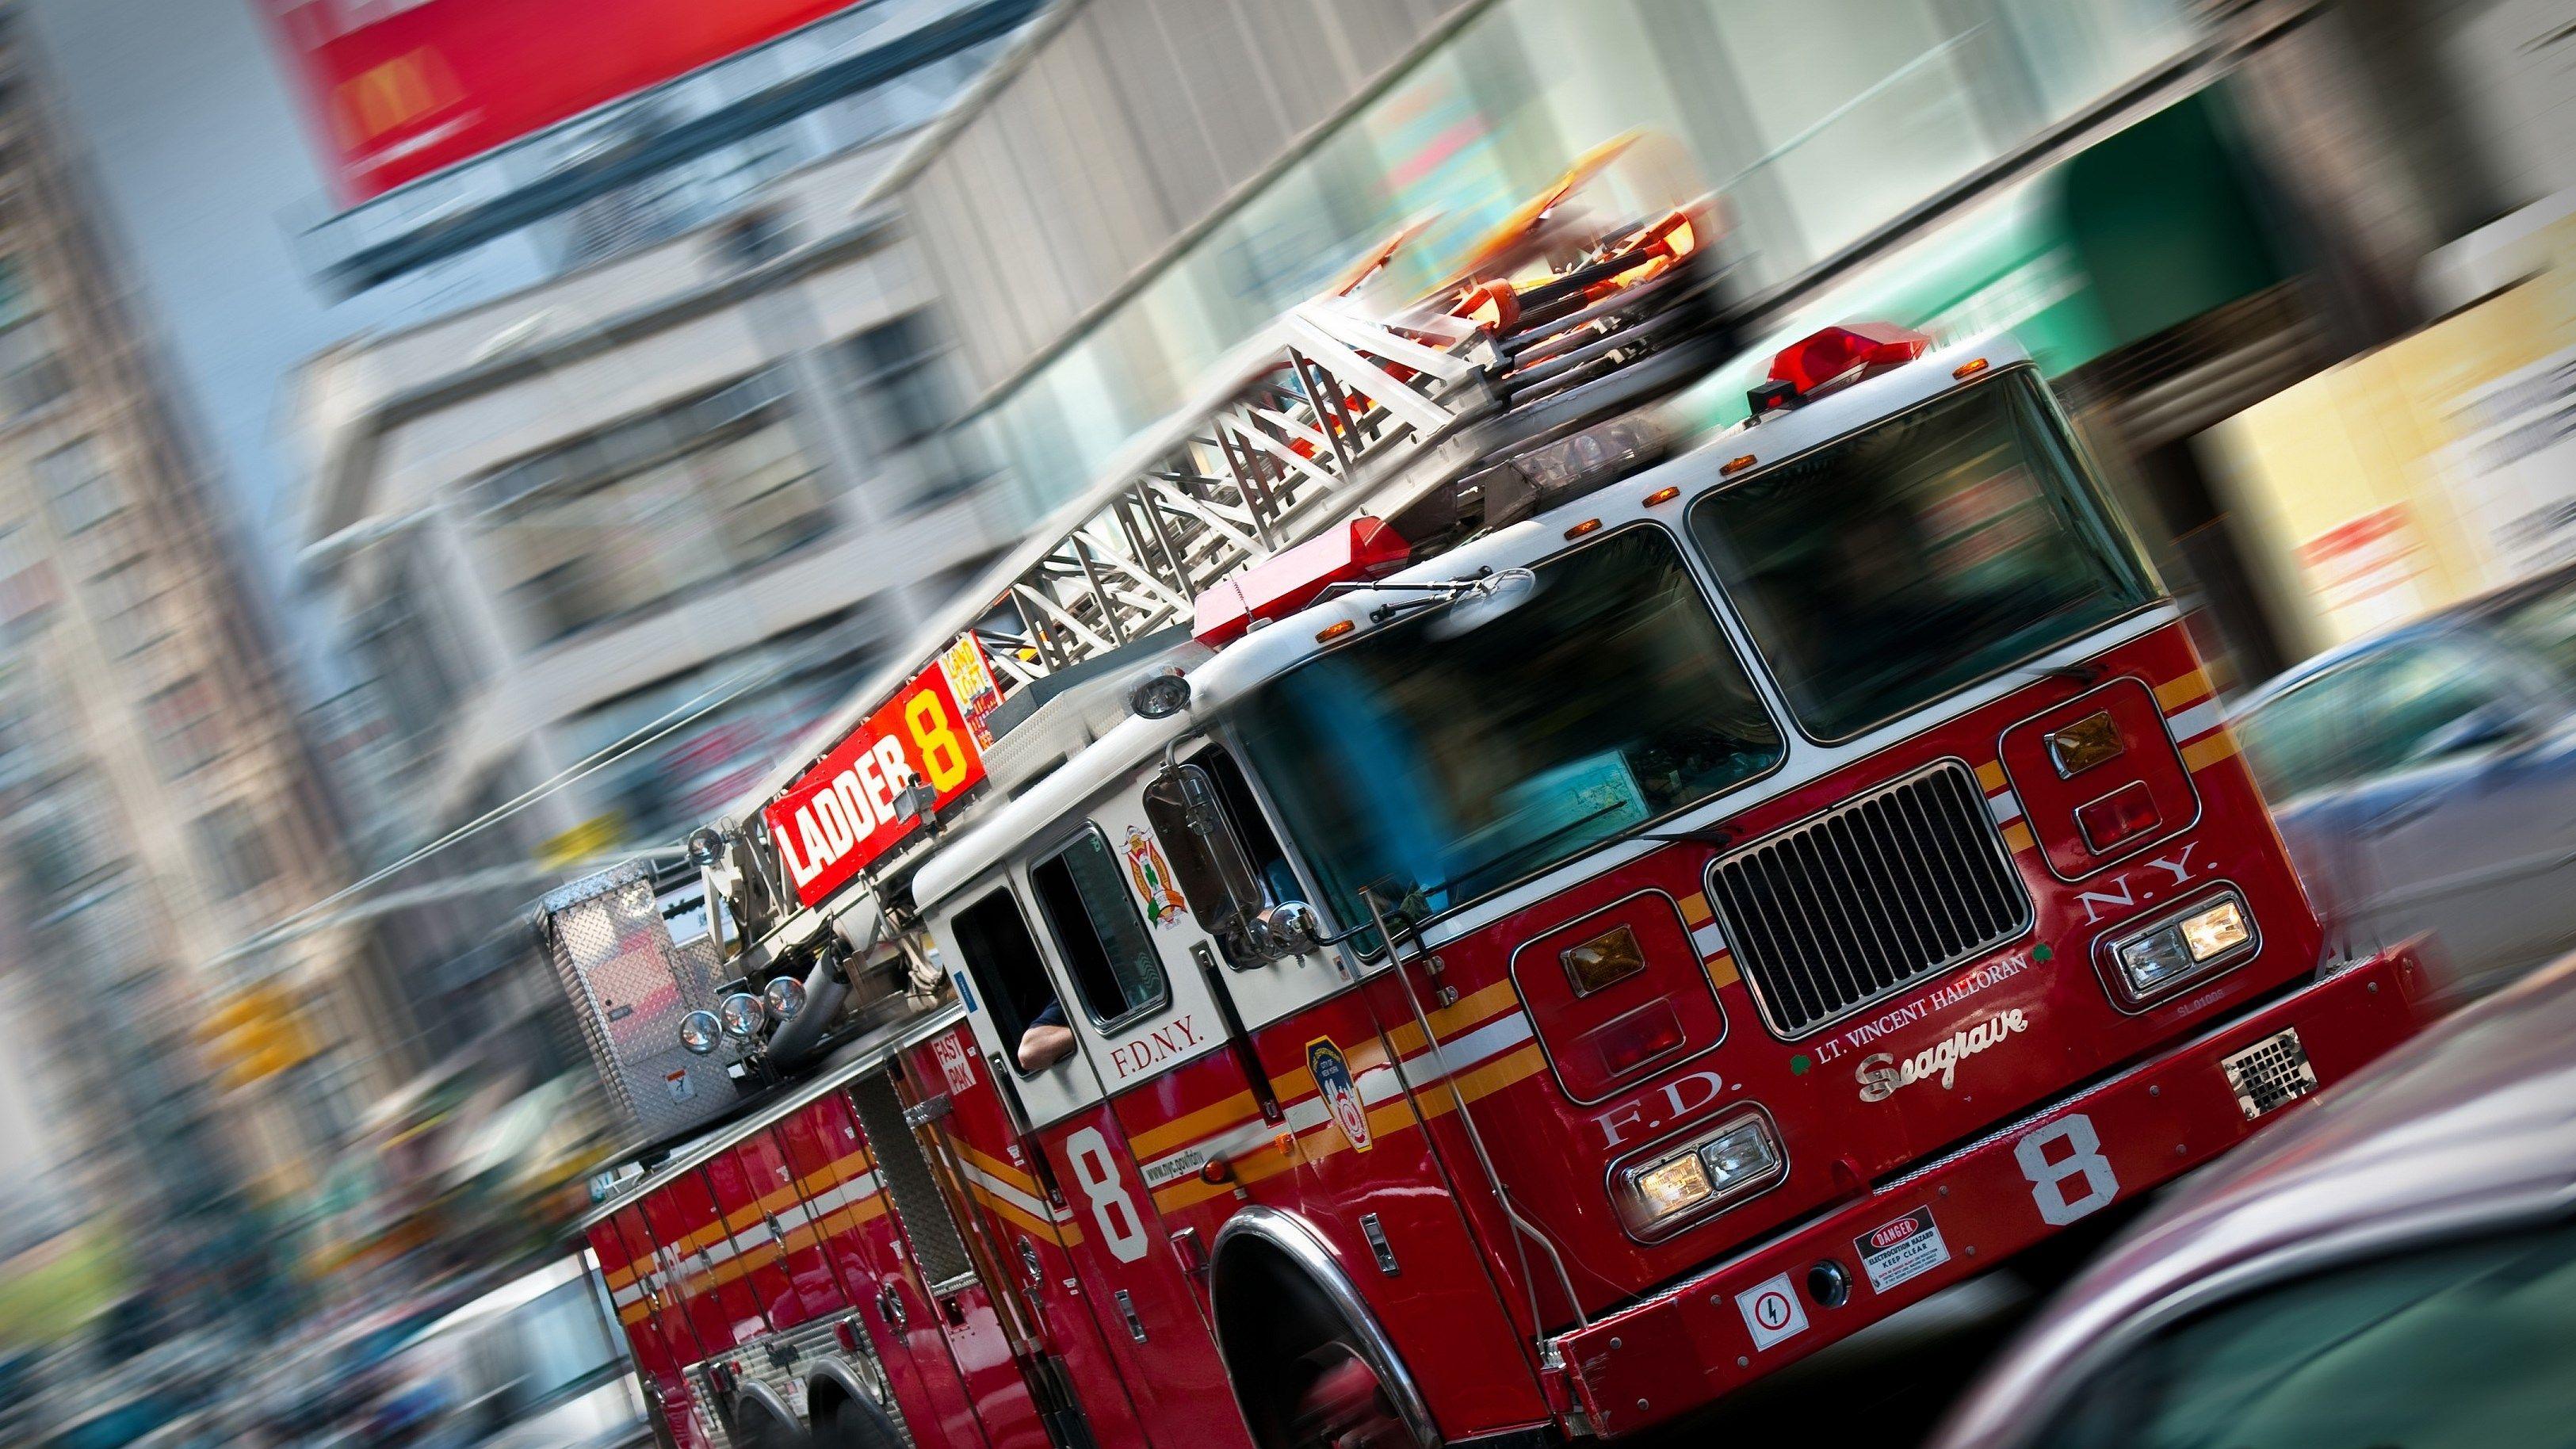 HDQ Image fire truck picture. wallpapercreator